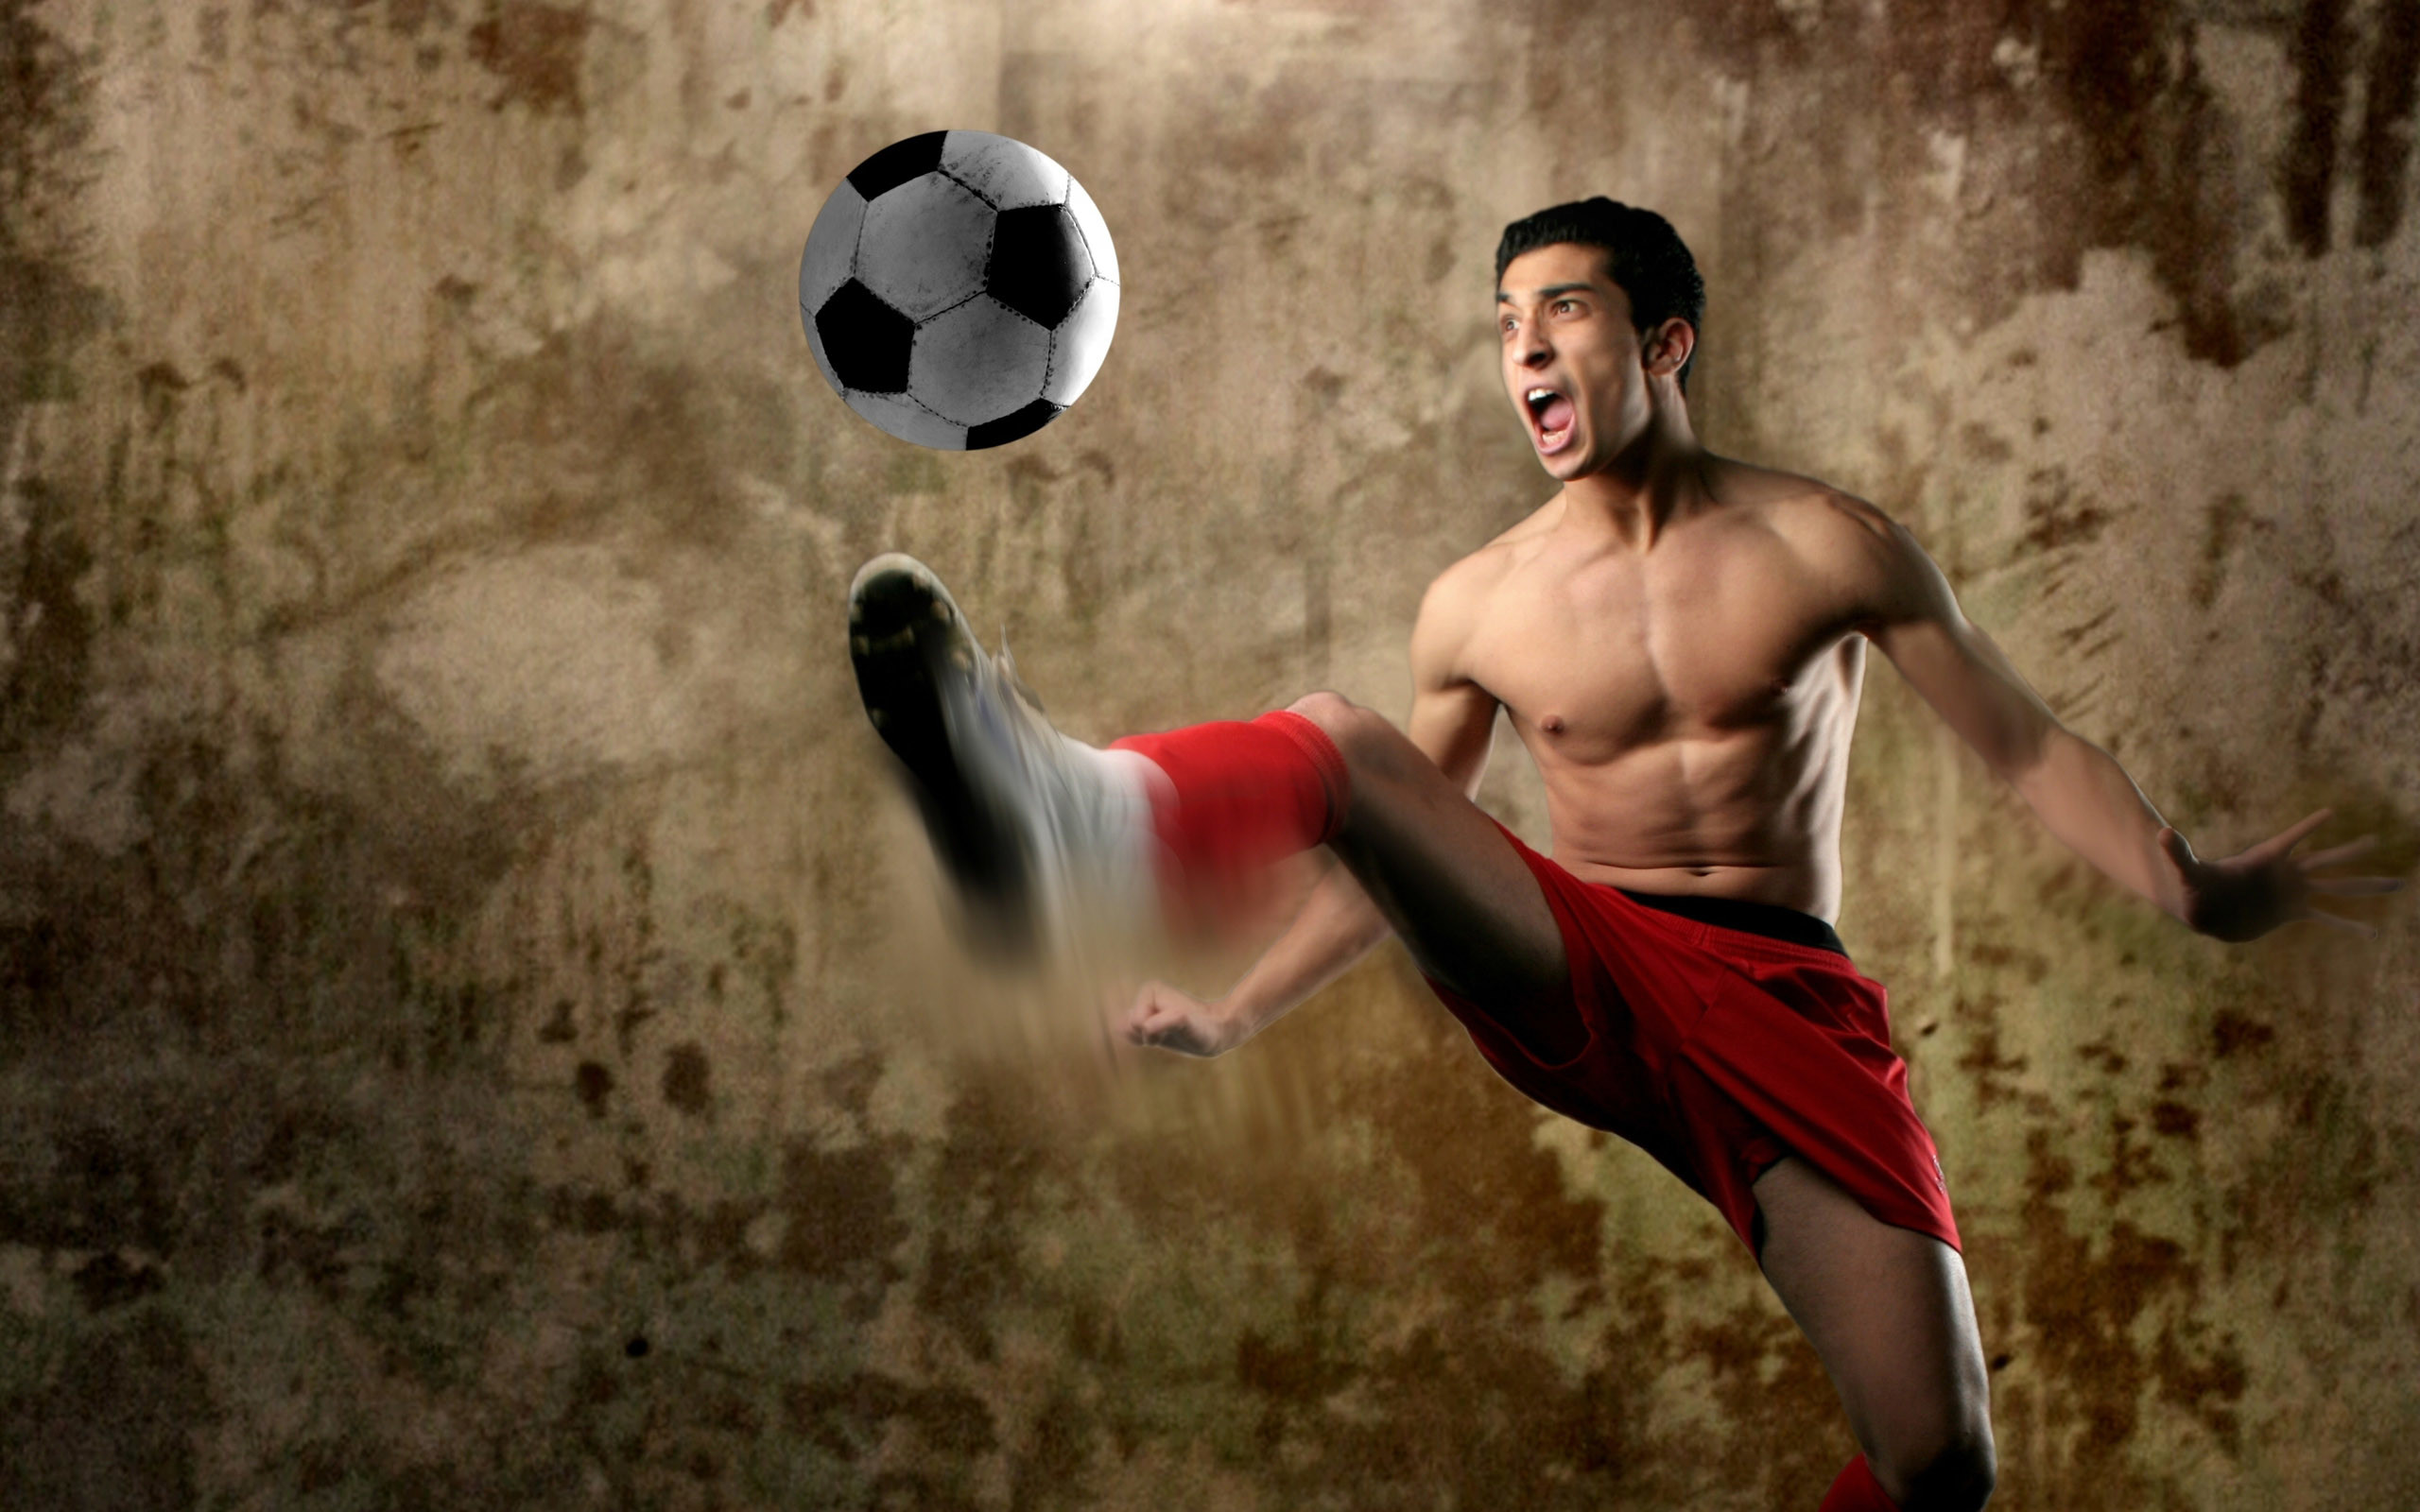 2560x1600 Cool Soccer Pictures HD Wallpapers Backgrounds of Your Choice